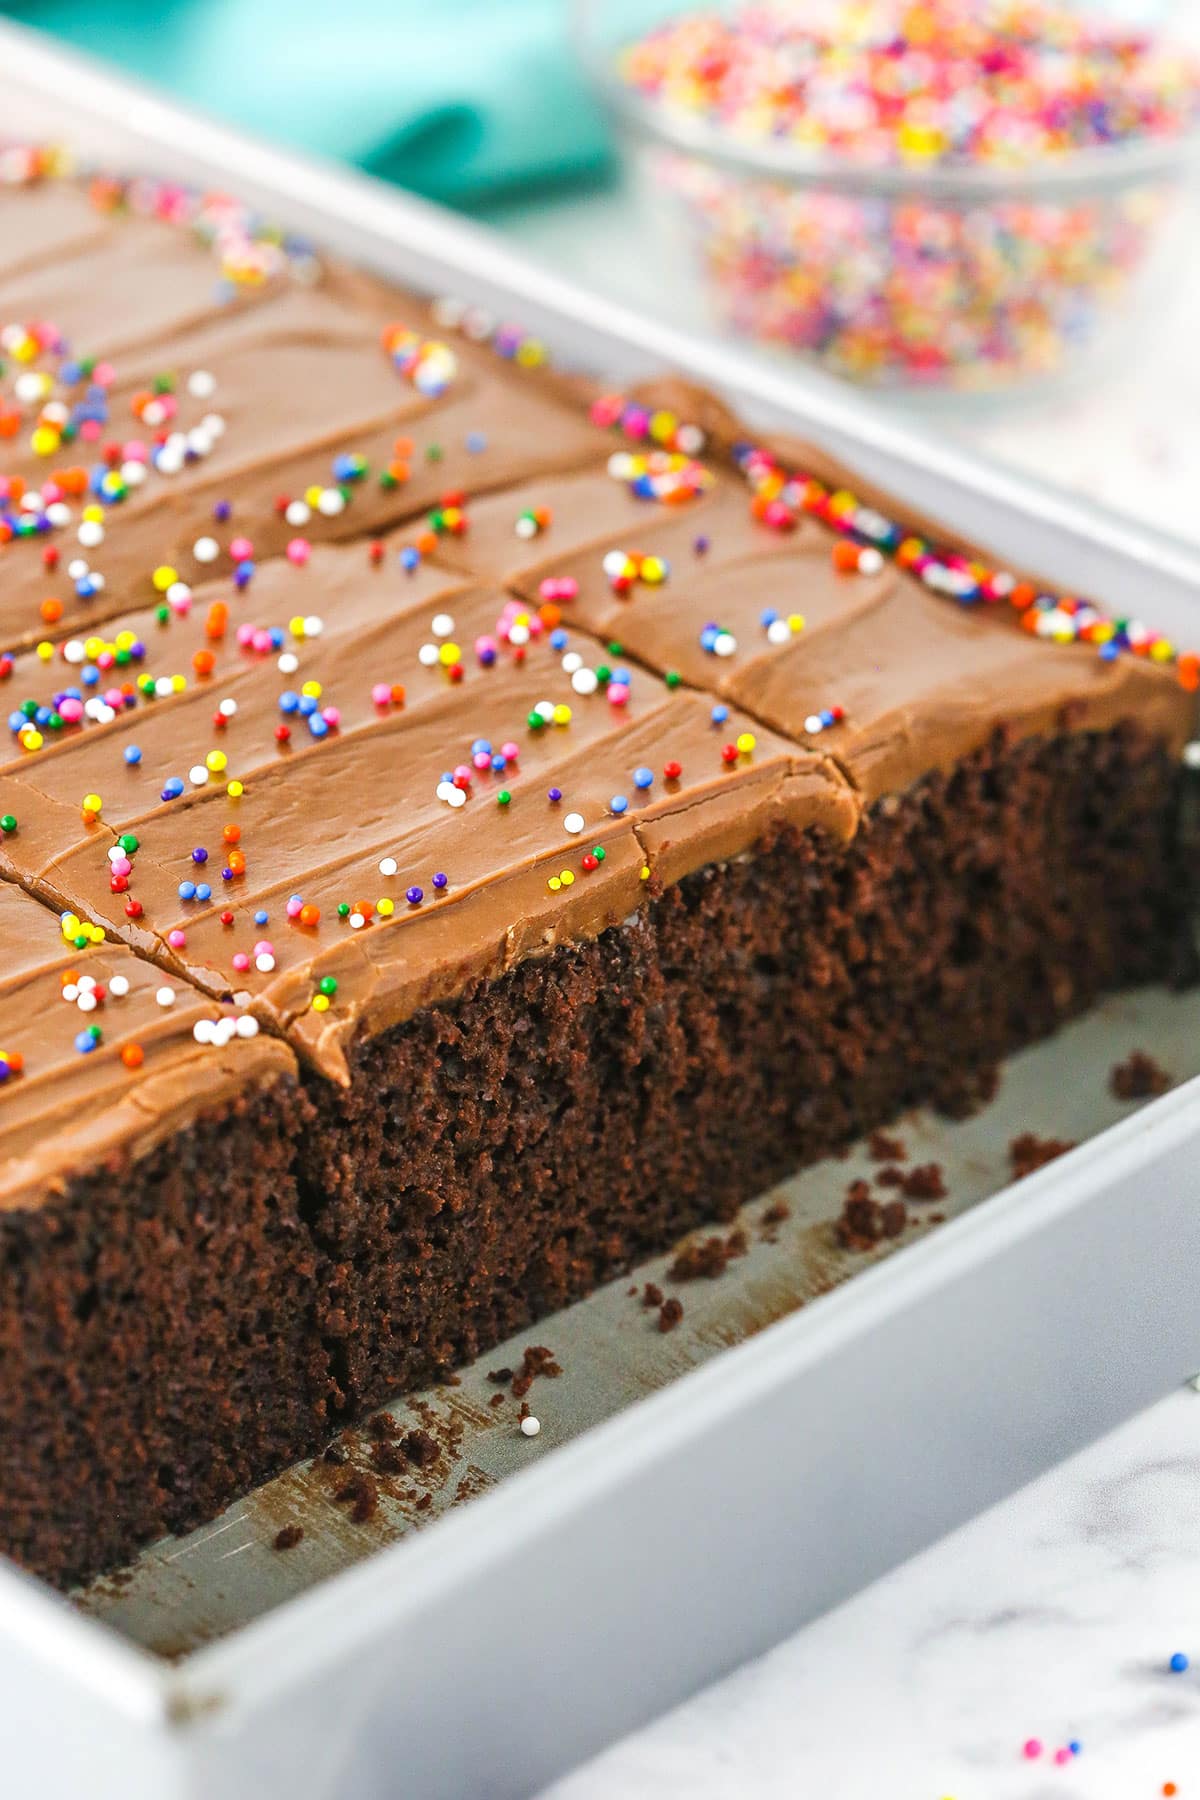 Wacky Cake with chocolate frosting and colorful sprinkles in a silver cake pan with the first row removed